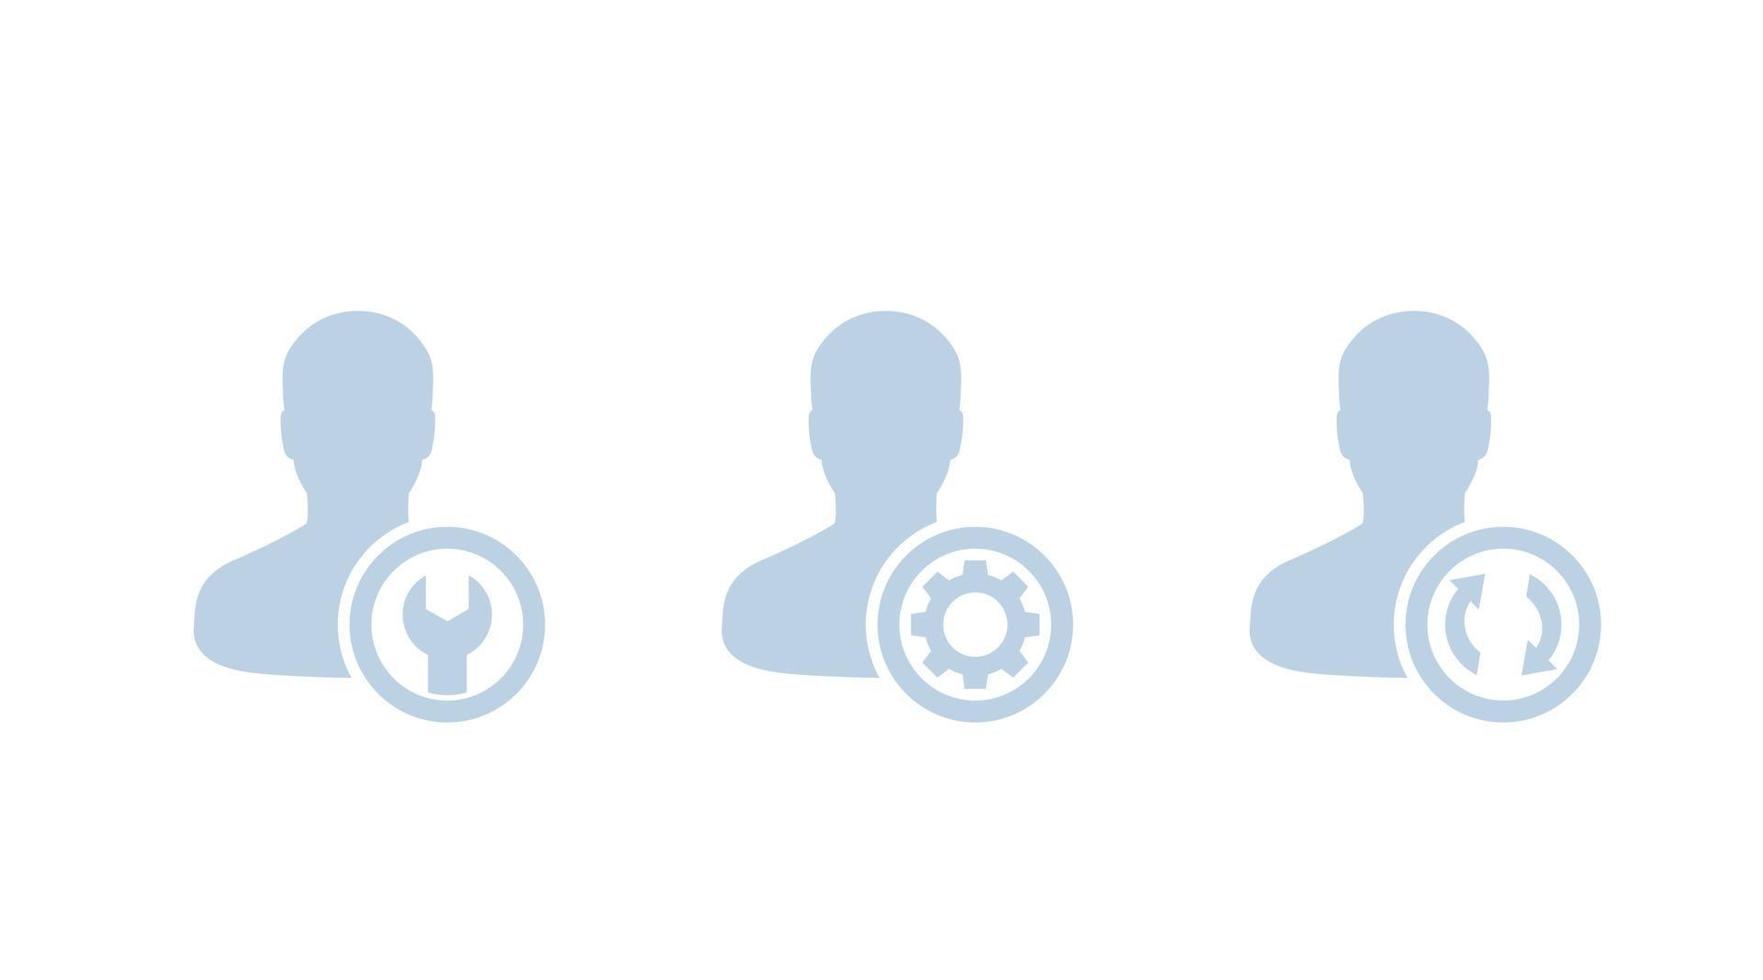 account, profile settings icons on white vector